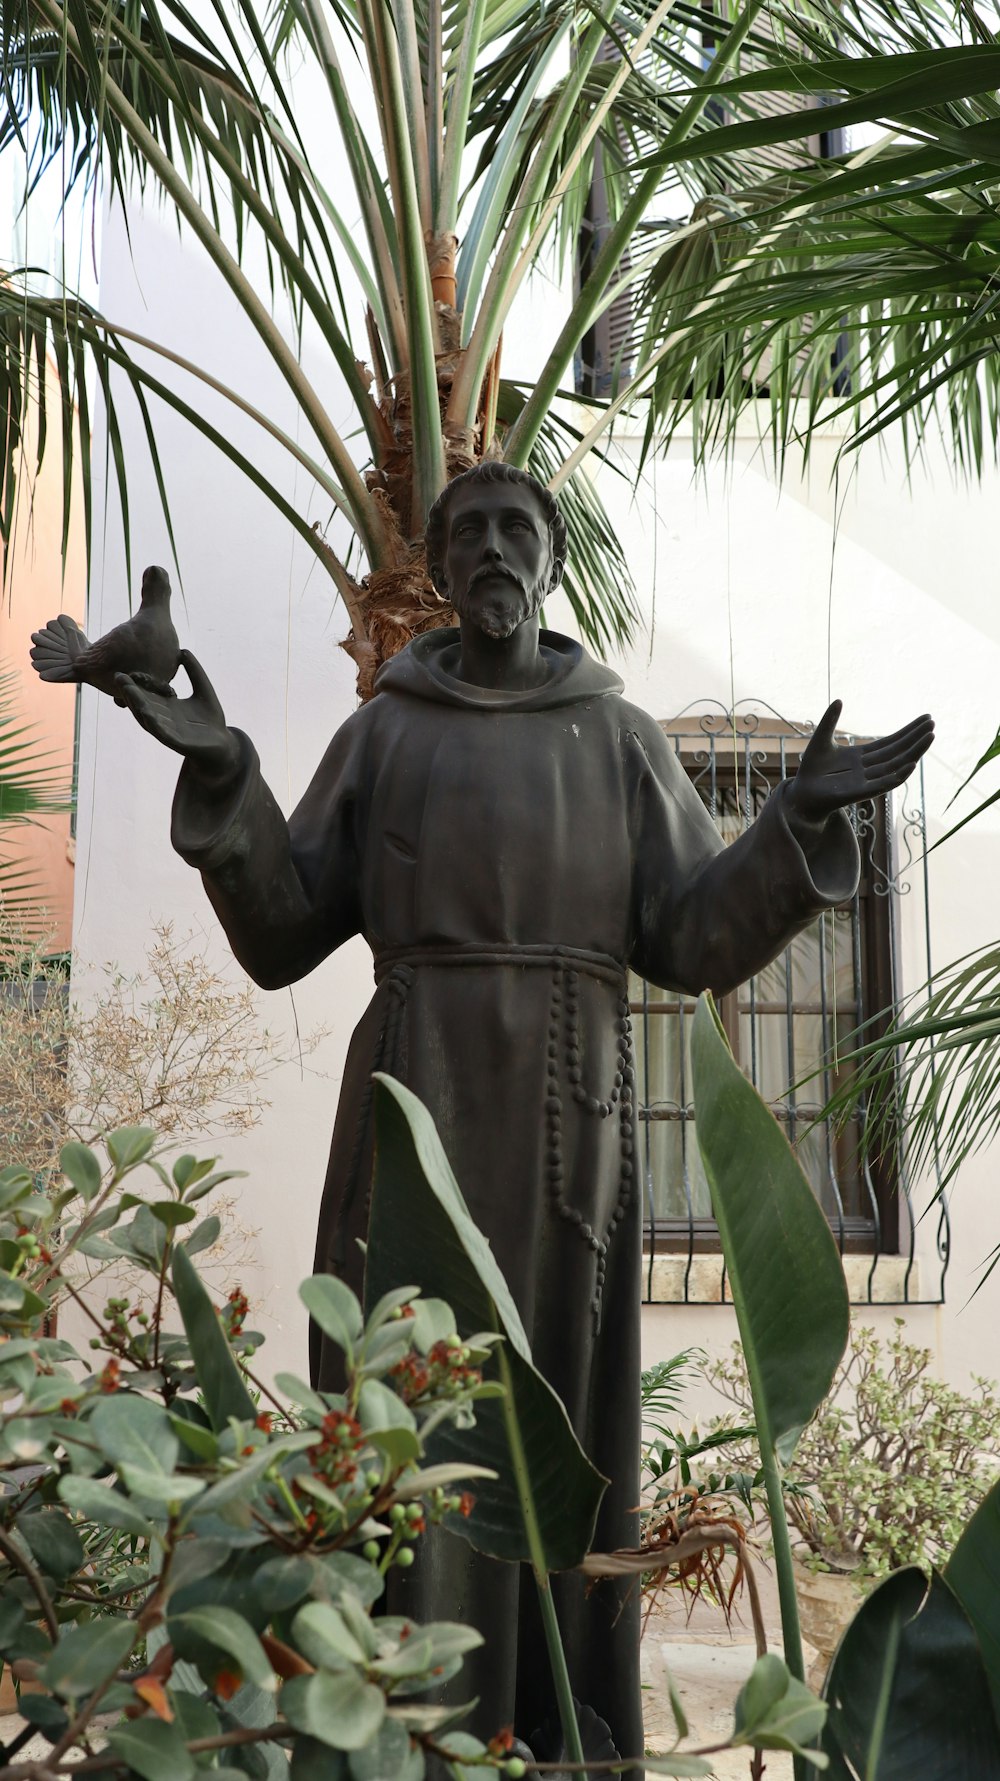 a statue of a man holding two hands in front of a palm tree